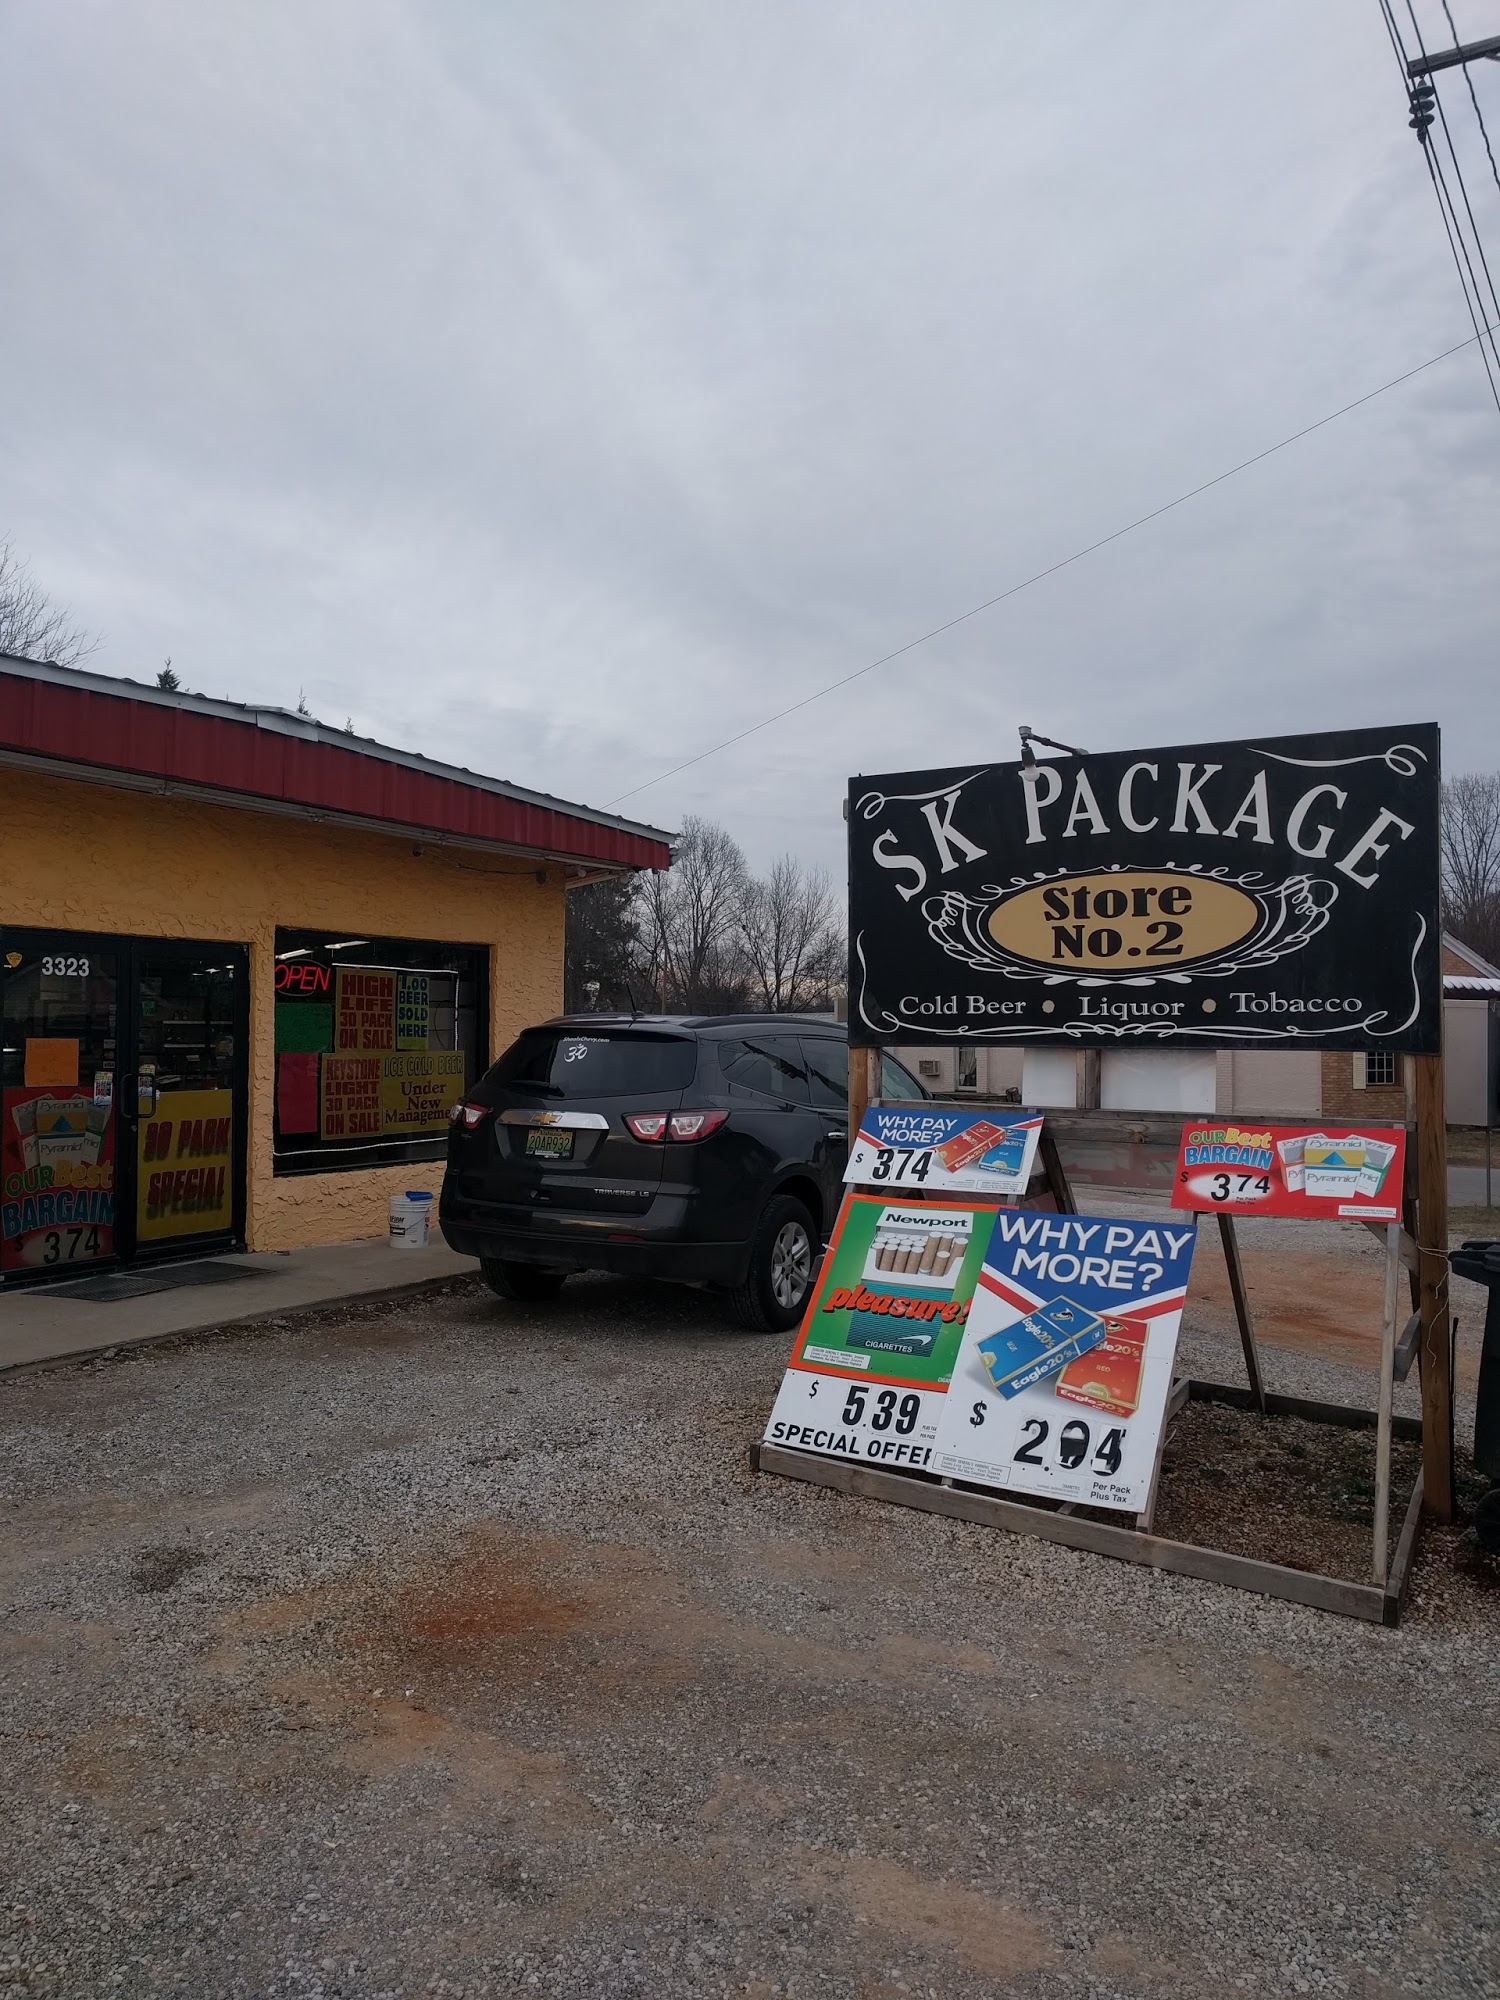 SK Package Store #2